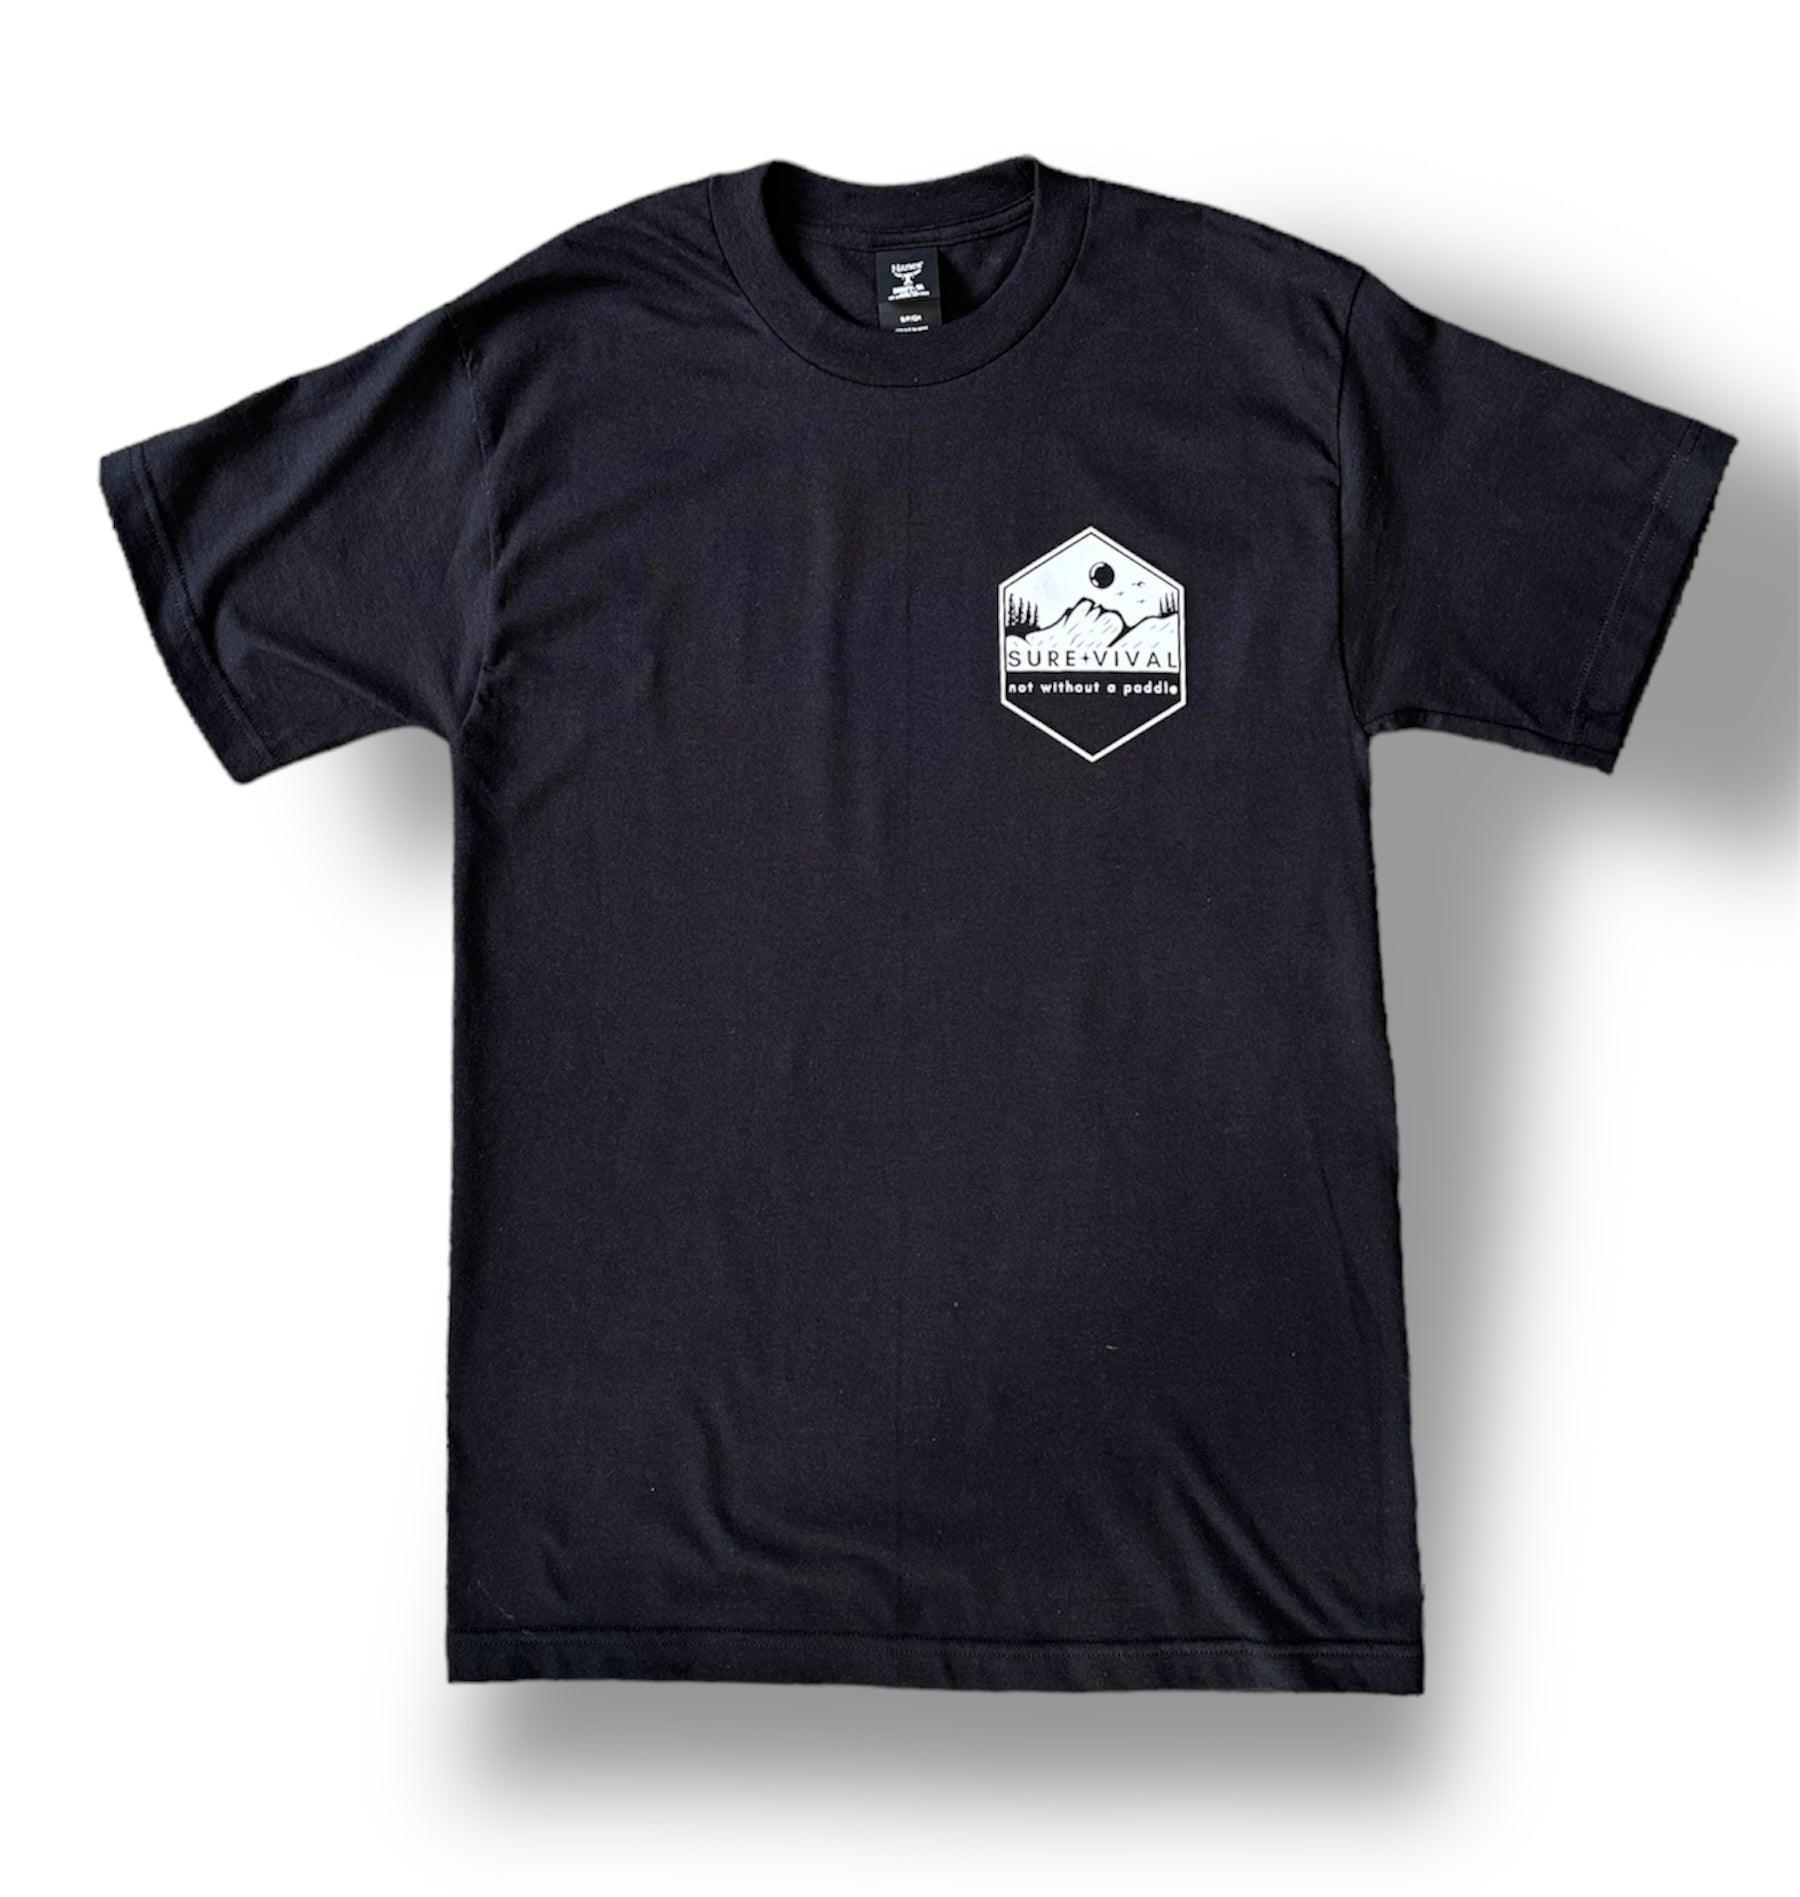 Premium Tee Collection: Stylish & Durable Shirts for Everyday Wear ...